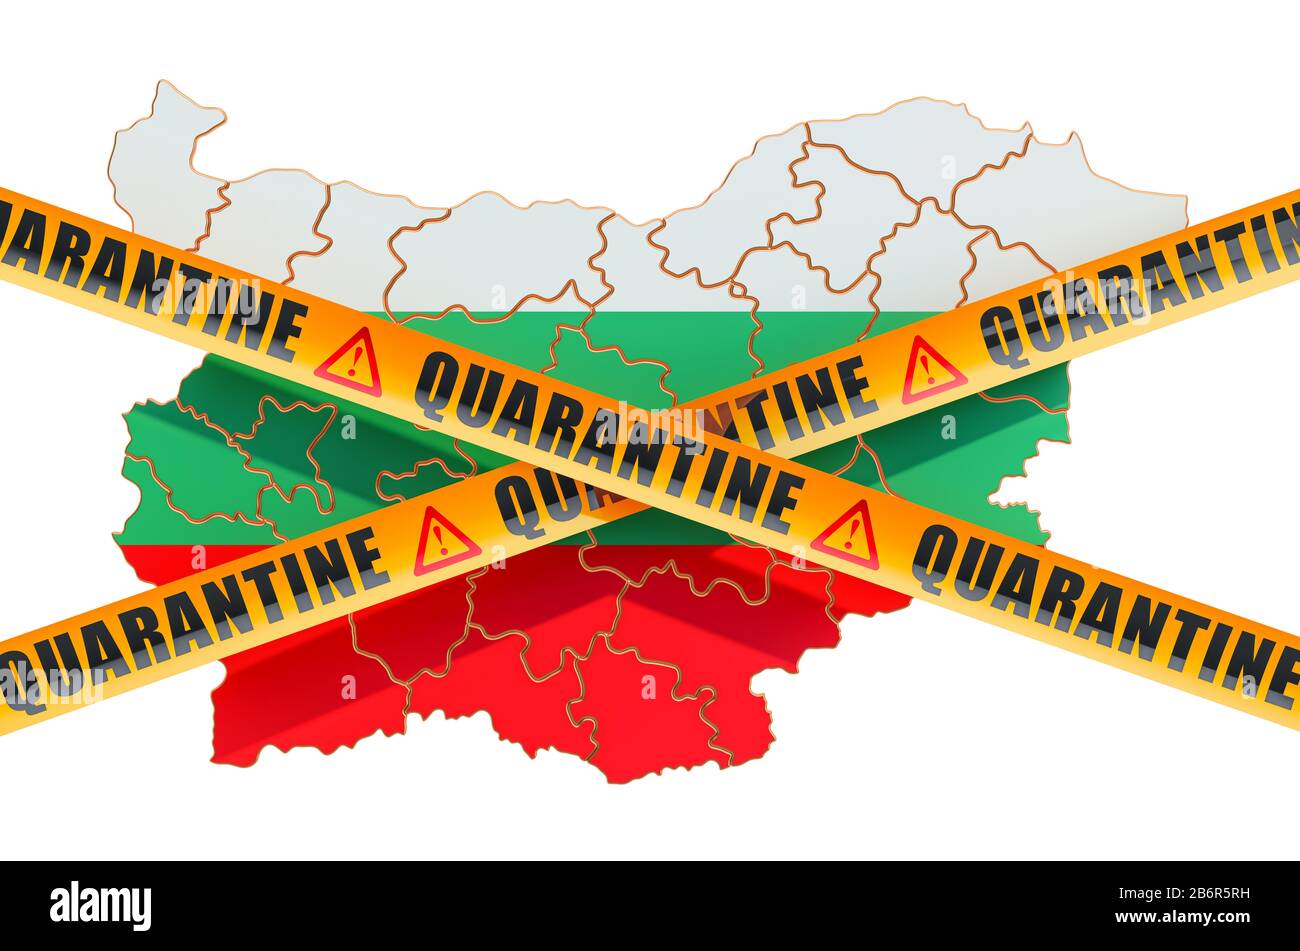 Quarantine in Bulgaria concept. Bulgarian map with caution barrier tapes, 3D rendering isolated on white background Stock Photo